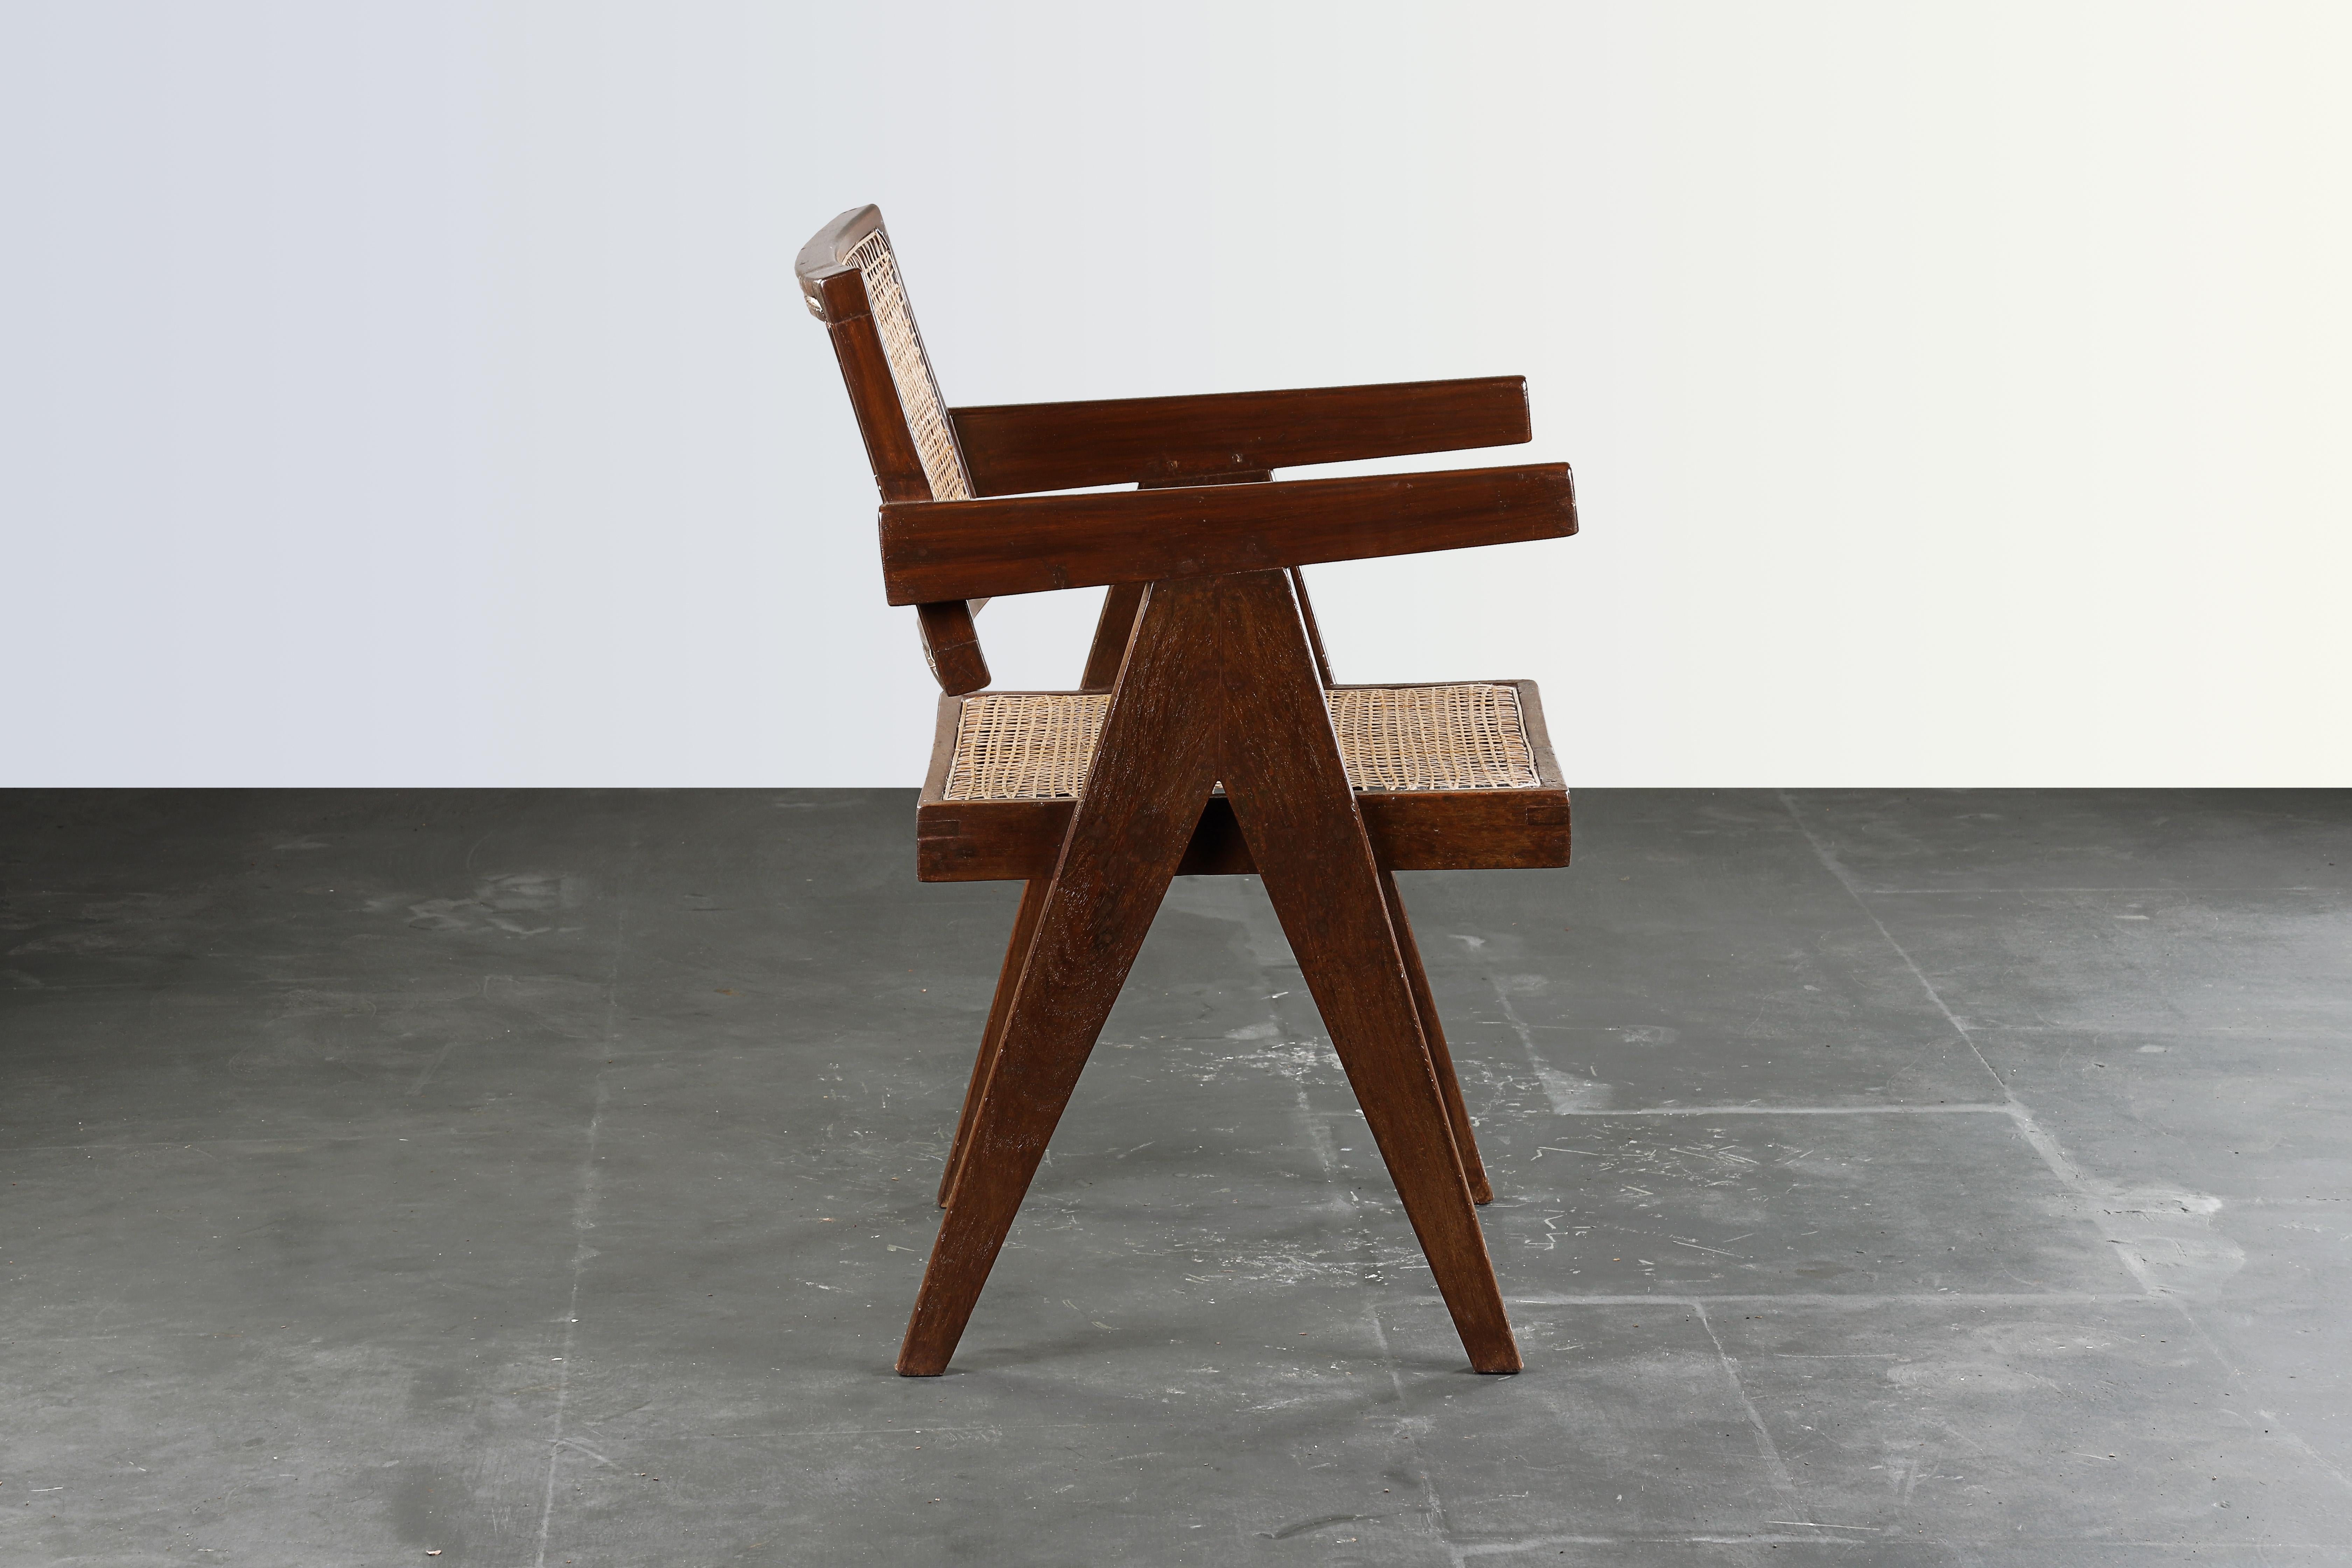 This chair is a fantastic piece, almost iconic. It is raw in its simplicity and 